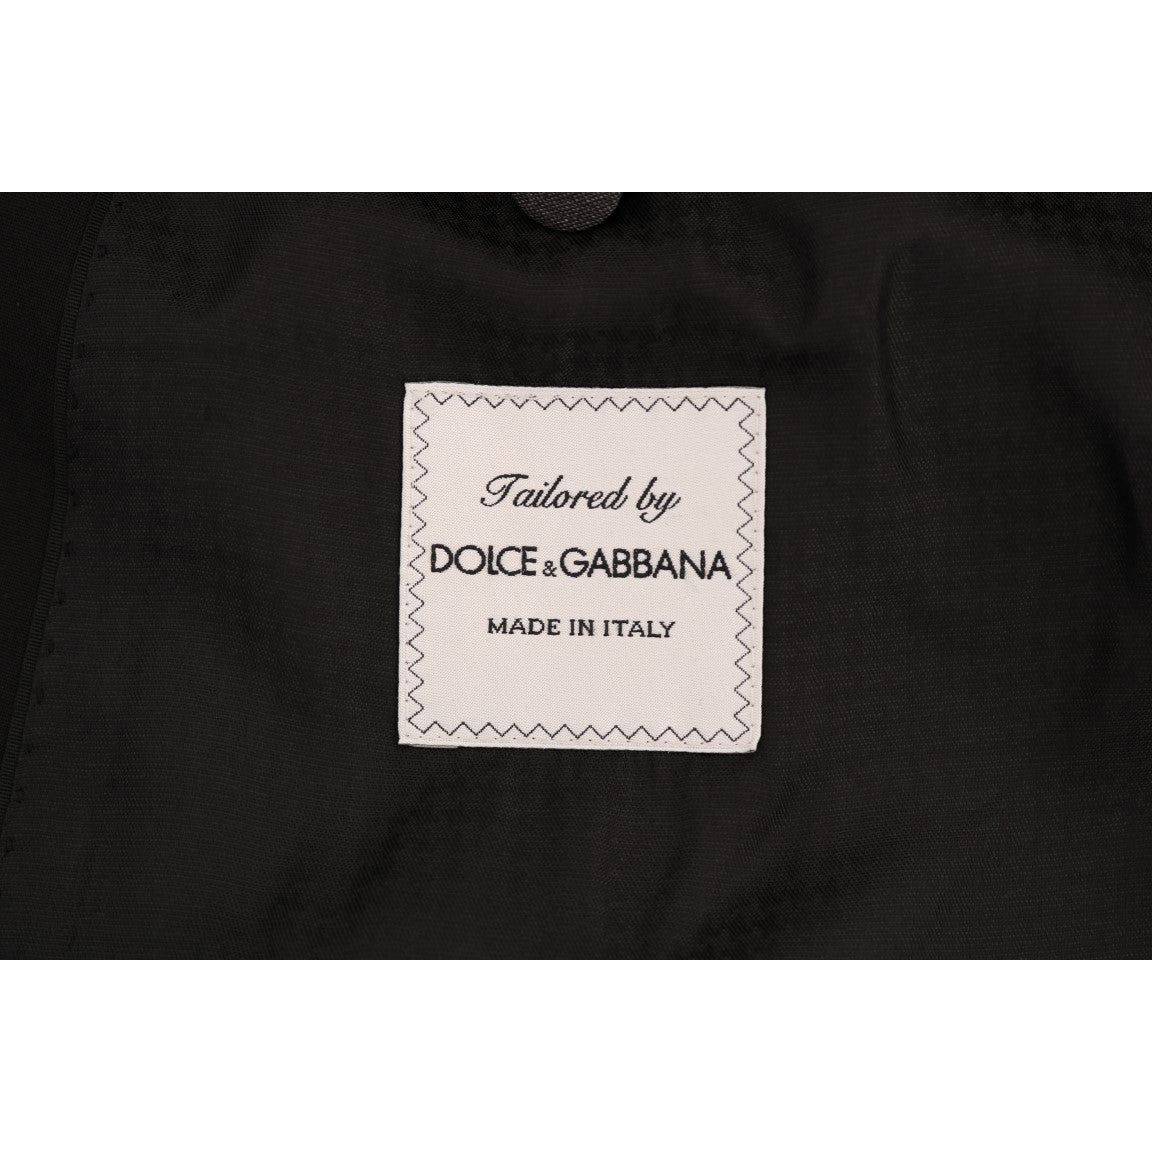 Dolce & Gabbana Elegant Black Double Breasted Wool Suit Suit black-wool-stretch-3-piece-two-button-suit 460902-black-wool-stretch-3-piece-two-button-suit-10.jpg